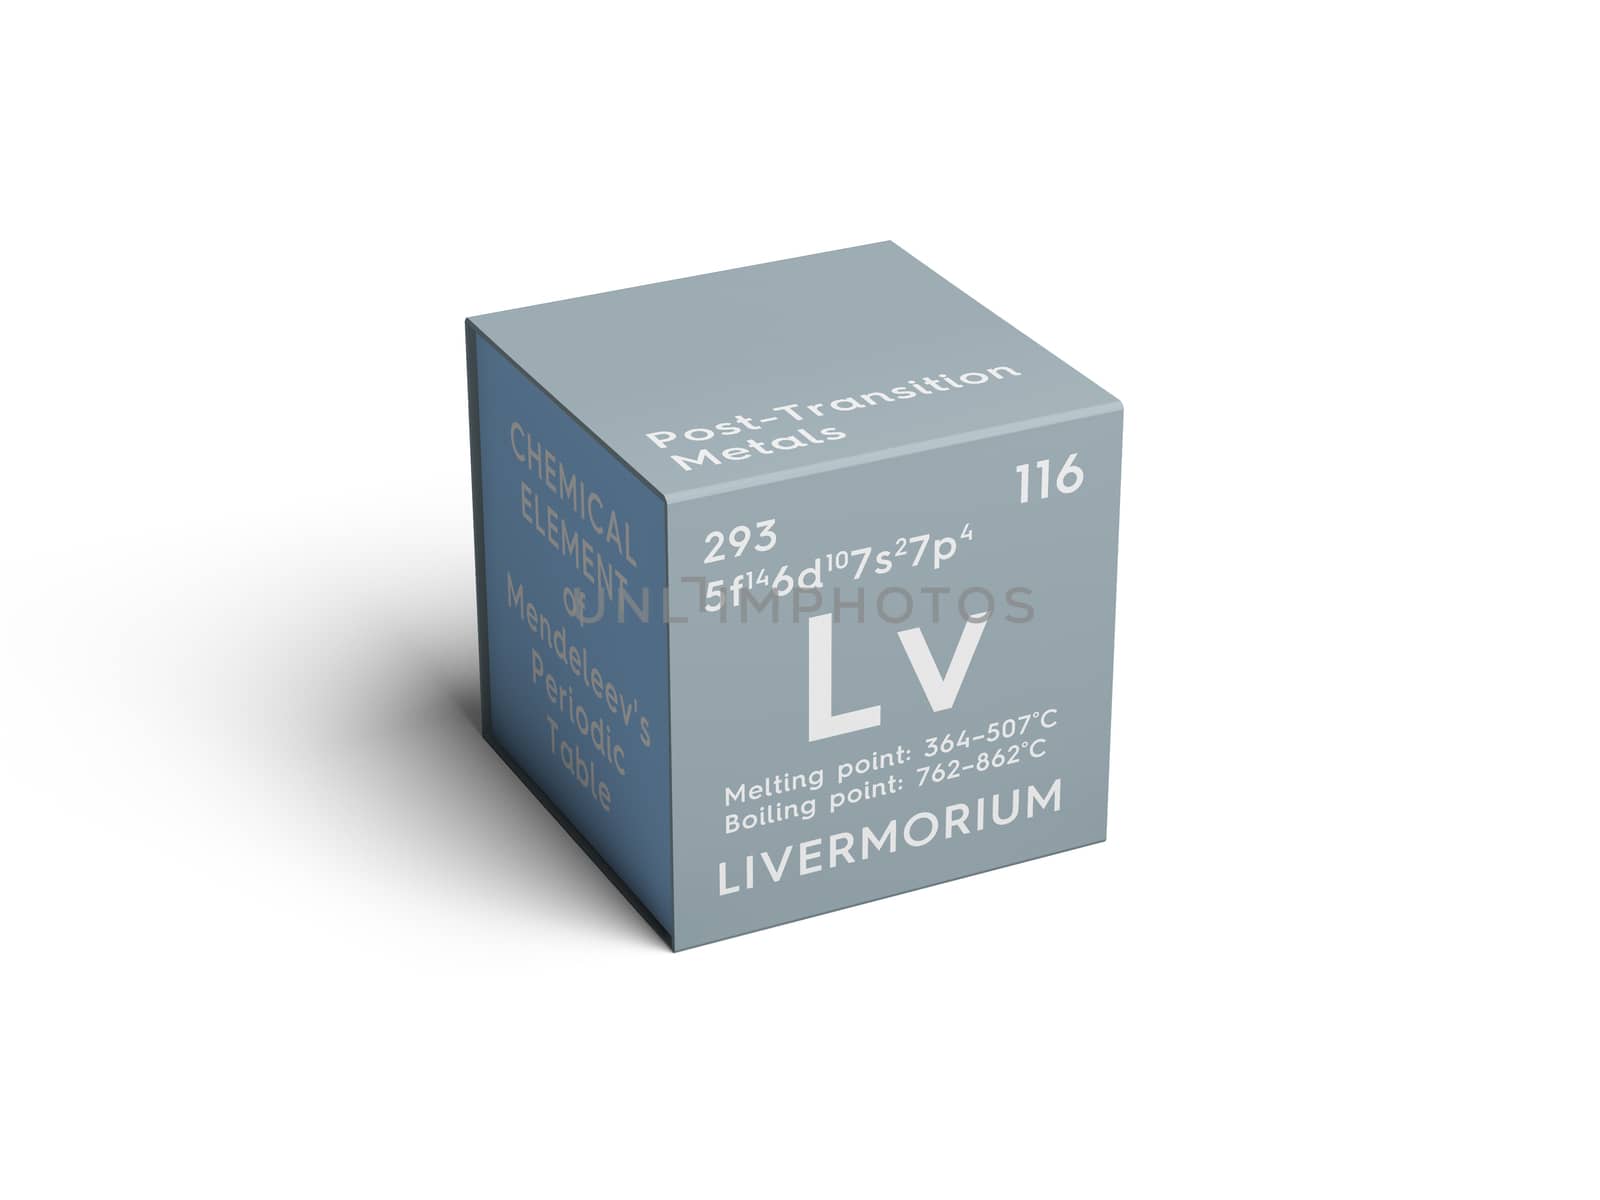 Livermorium. Post-transition metals. Chemical Element of Mendele by sanches812